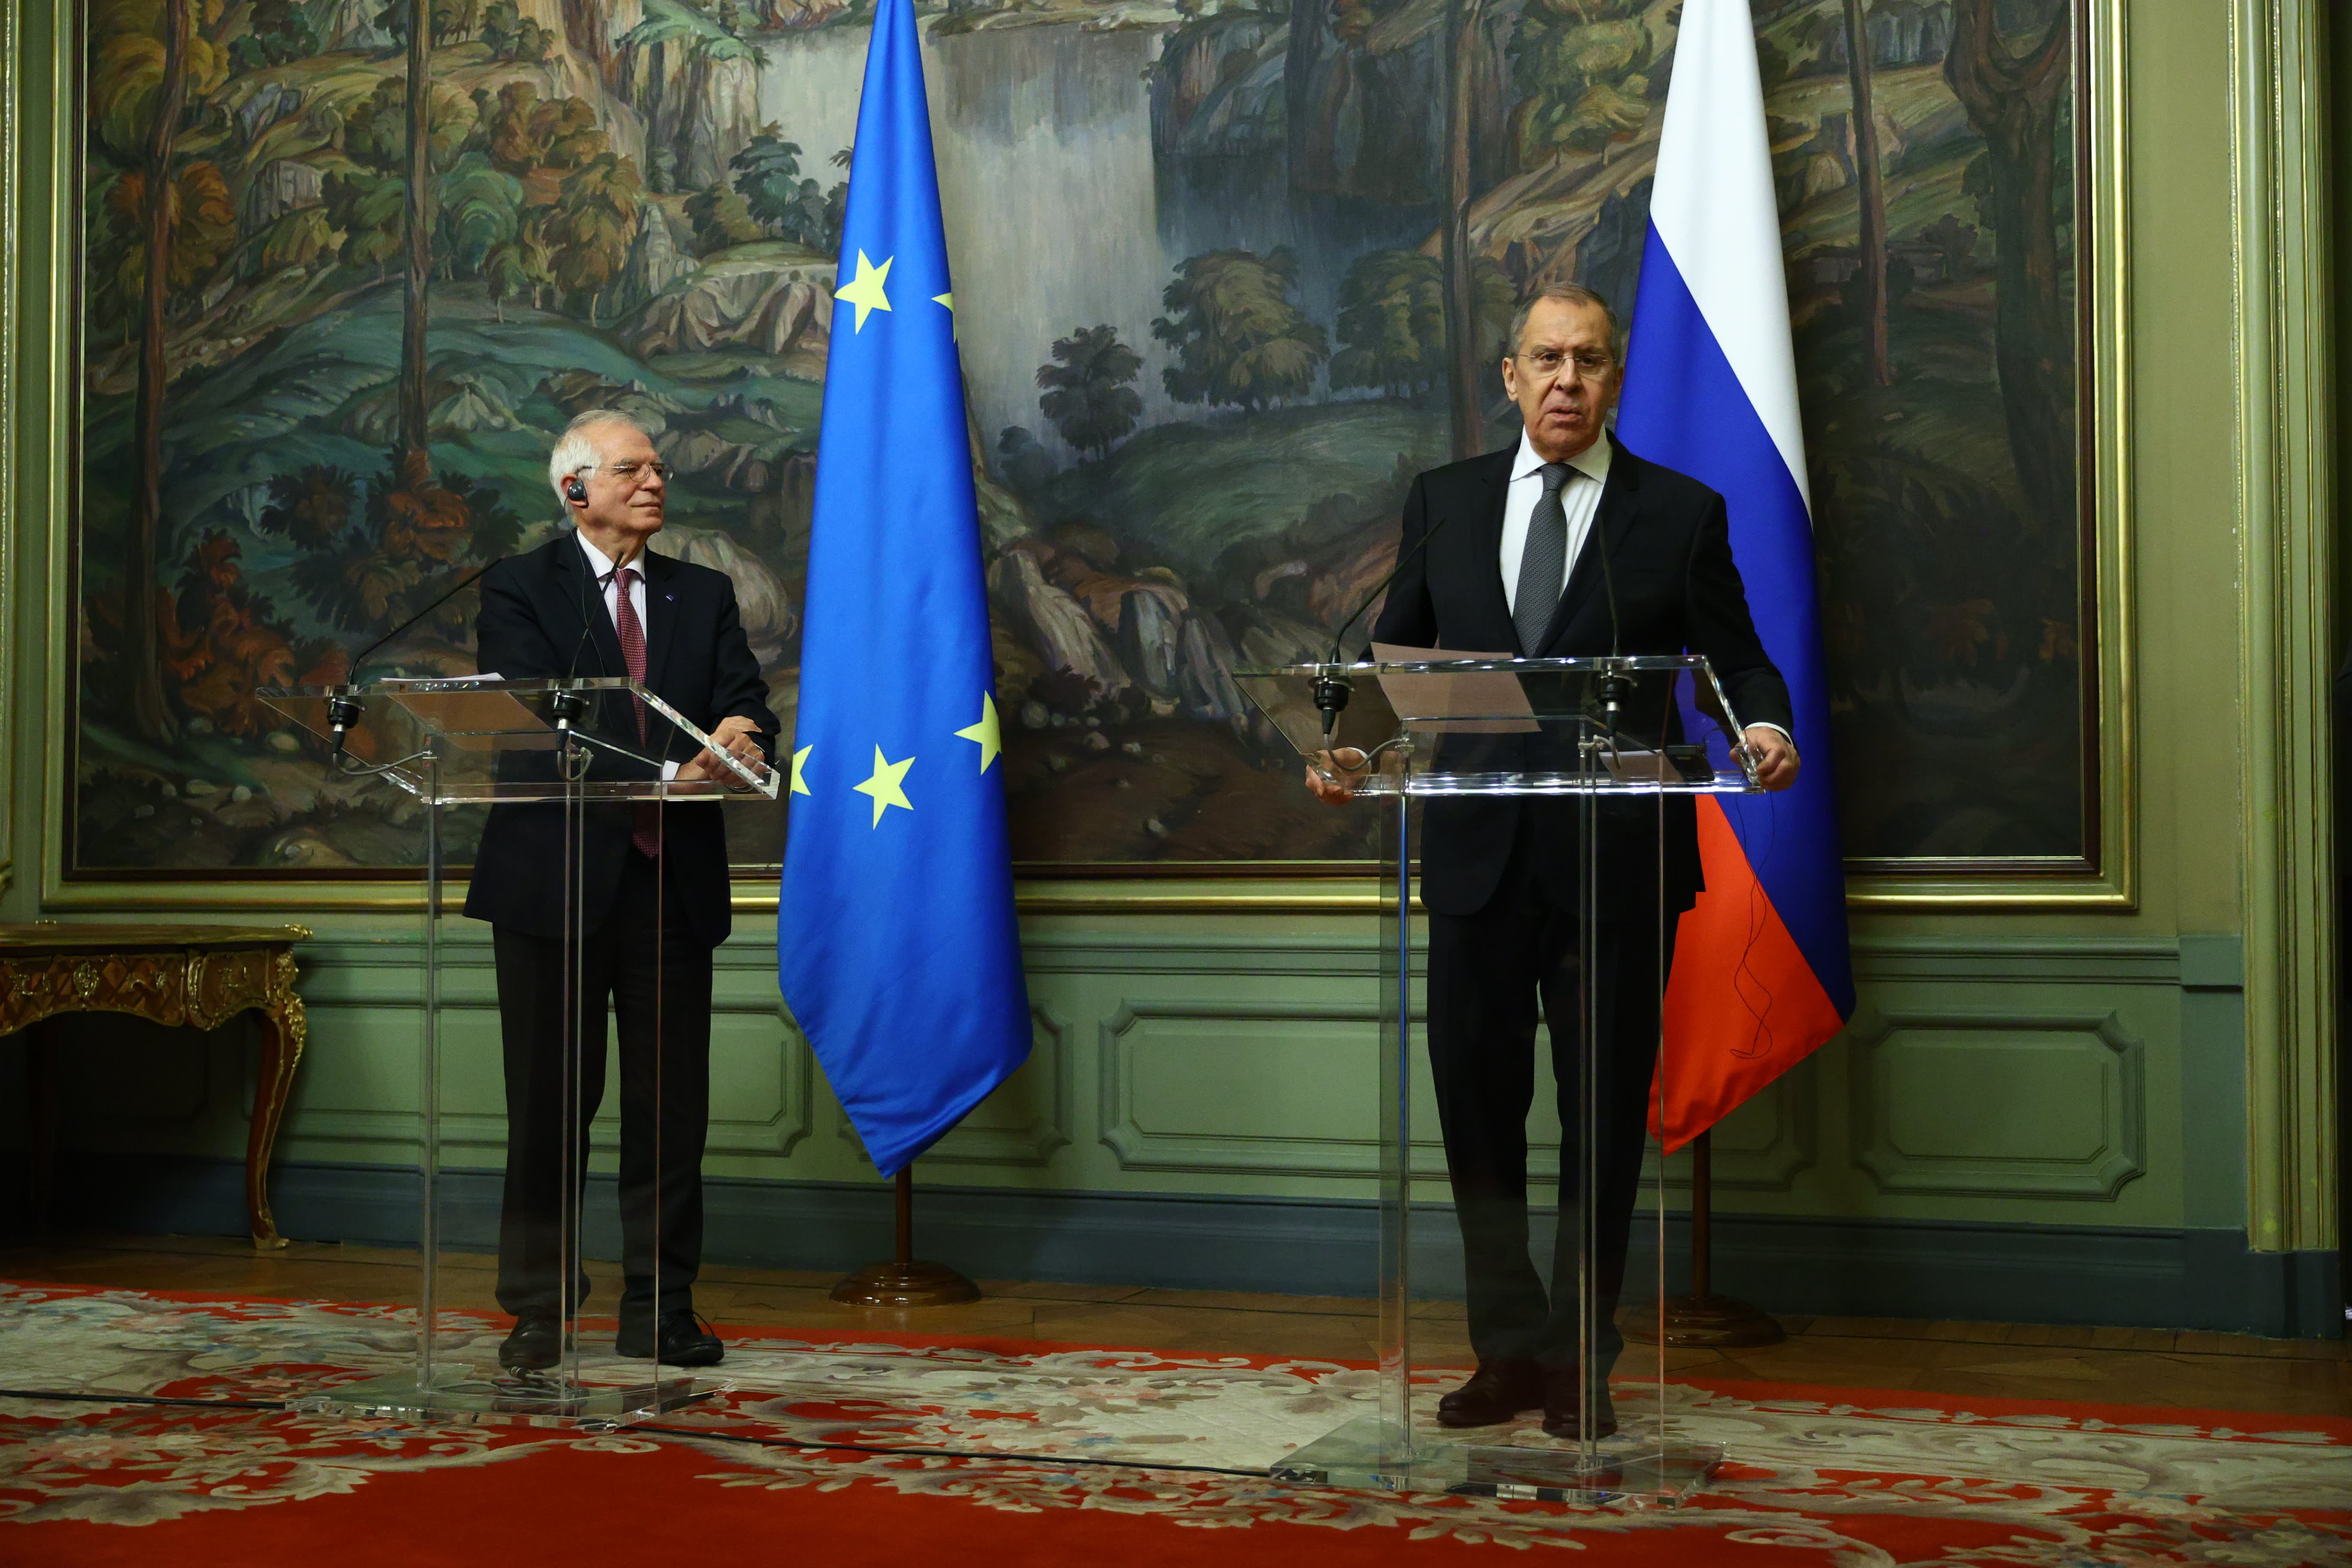 Tensions between Russia and EU reach new low after Lavrov comments in Moscow